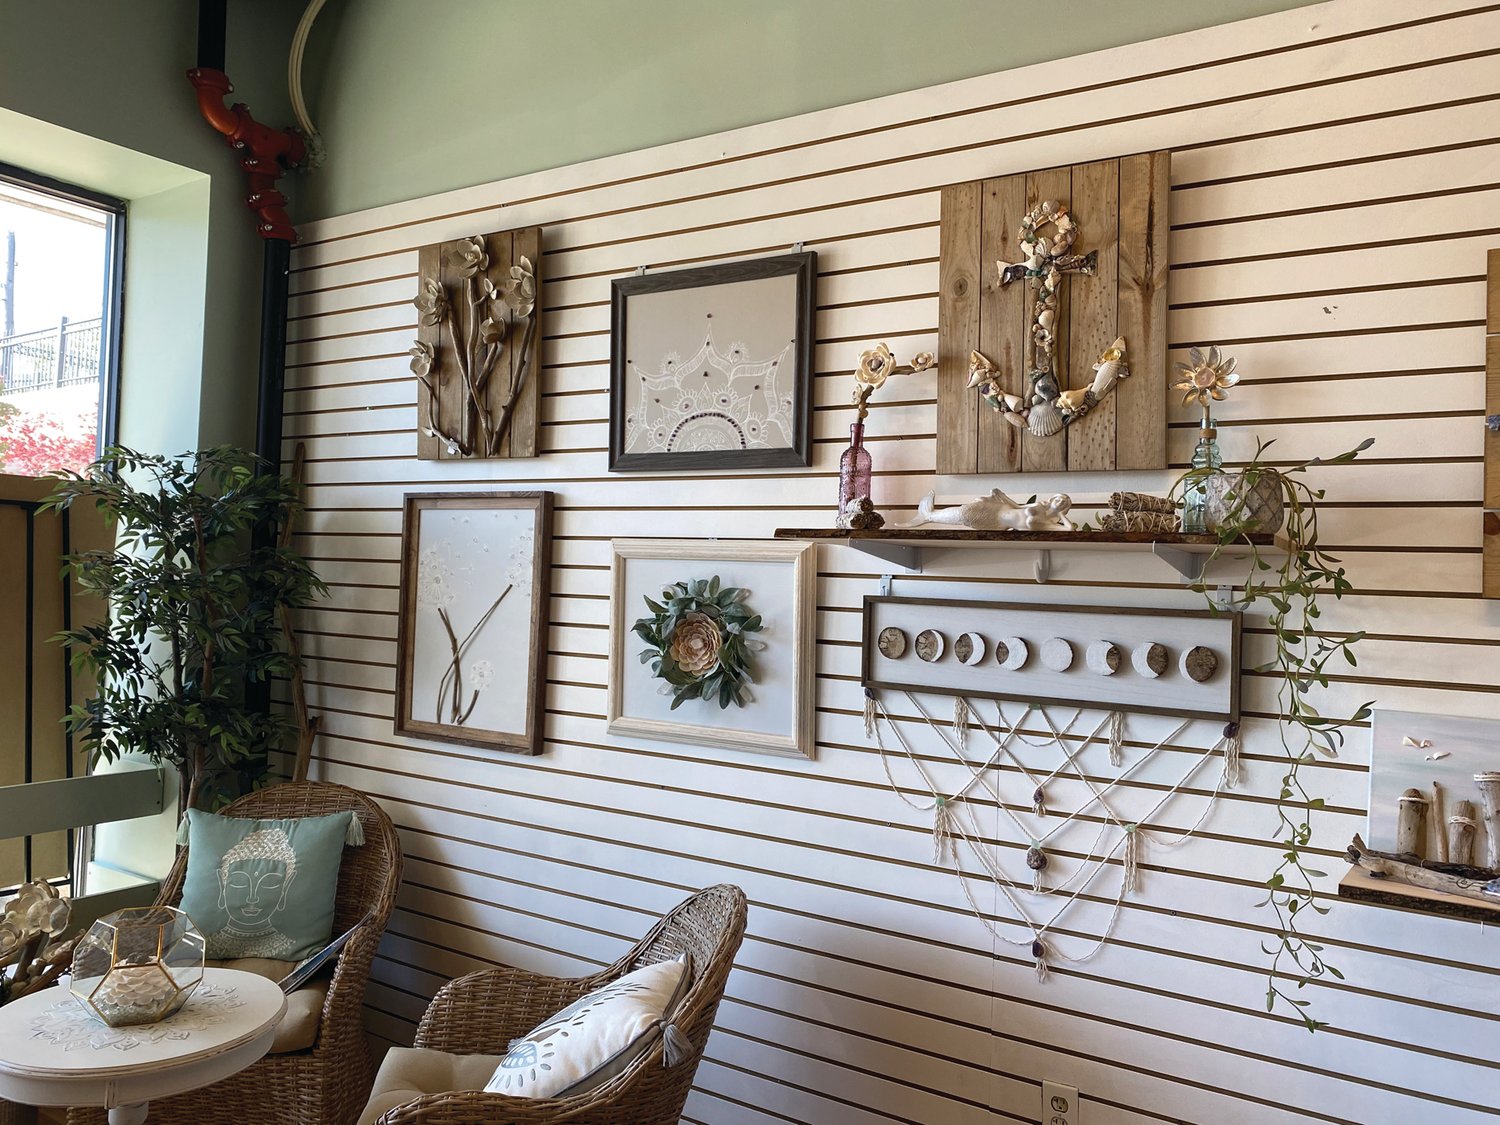  ART FROM THE EARTH:  Almonte’s art is inspired by the natural world. She uses handpicked seaglass, stones, shells, driftwood and more in her work and infuses each creation with good energy.